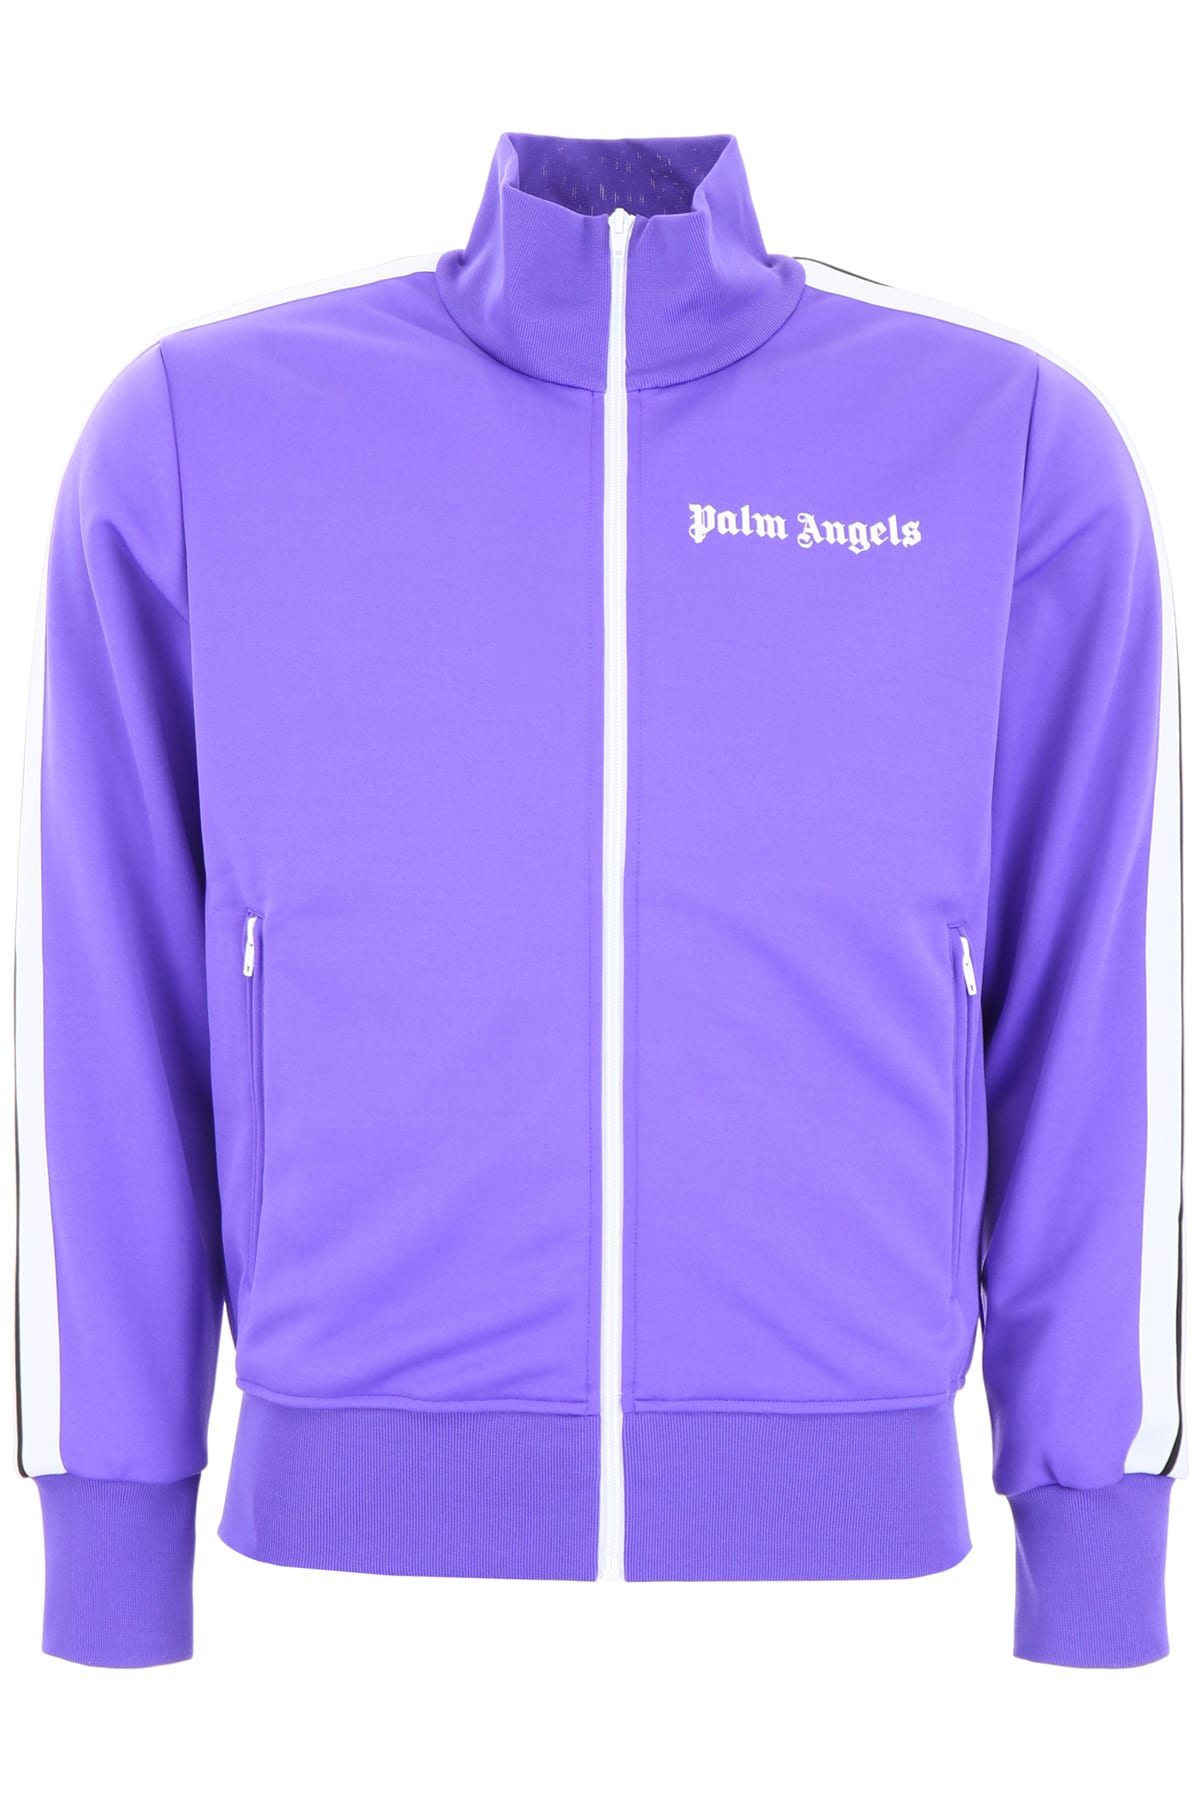 Palm Angels Palm Angels Track Jacket With Bands - PURPLE WHITE (Purple ...